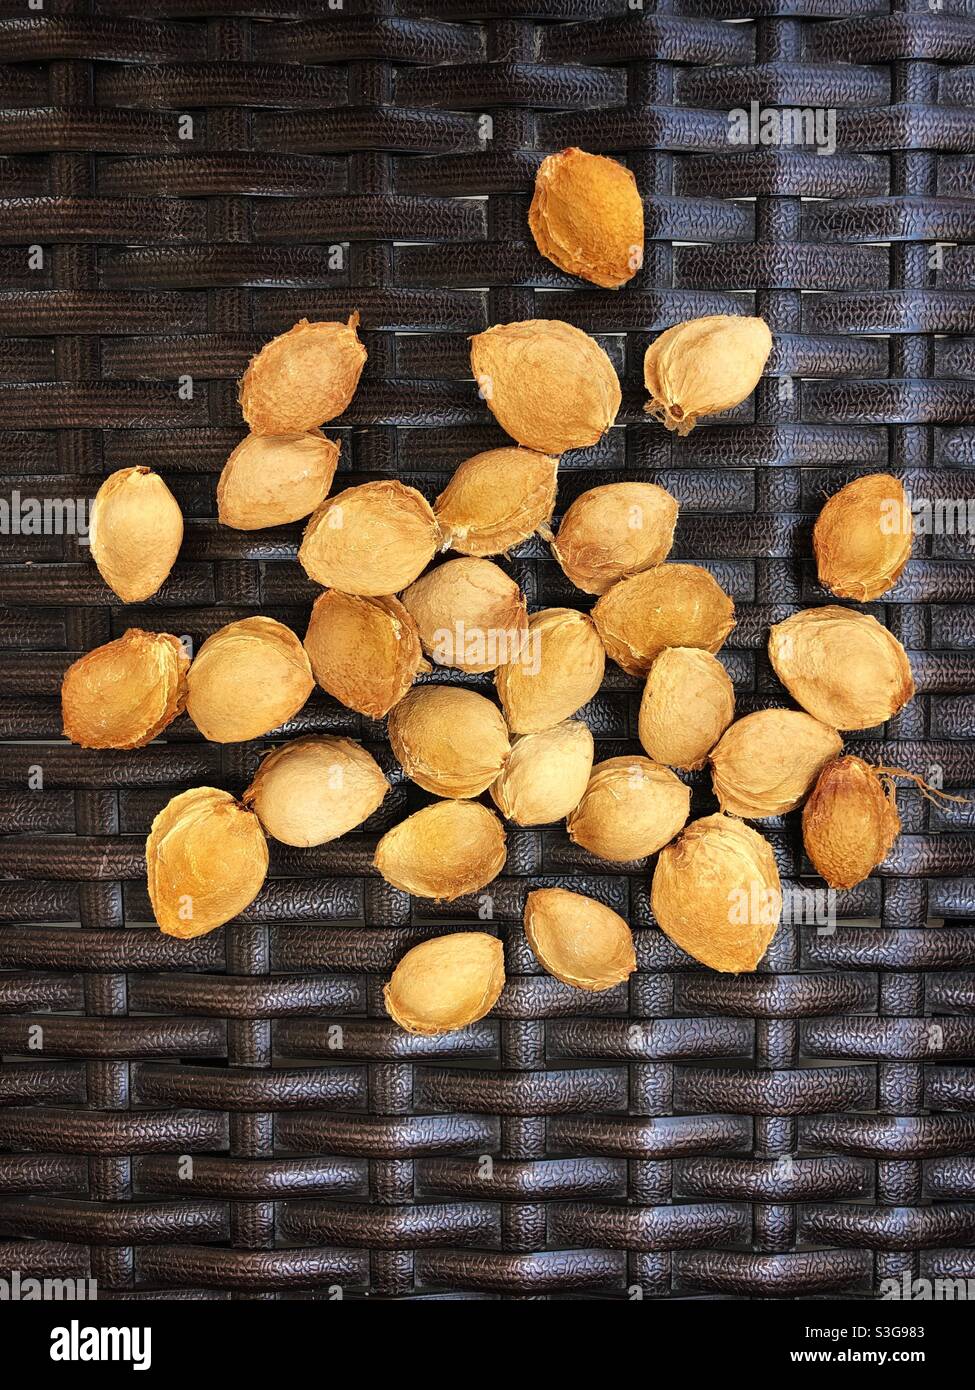 Apricot stones as nutritious nuts Stock Photo